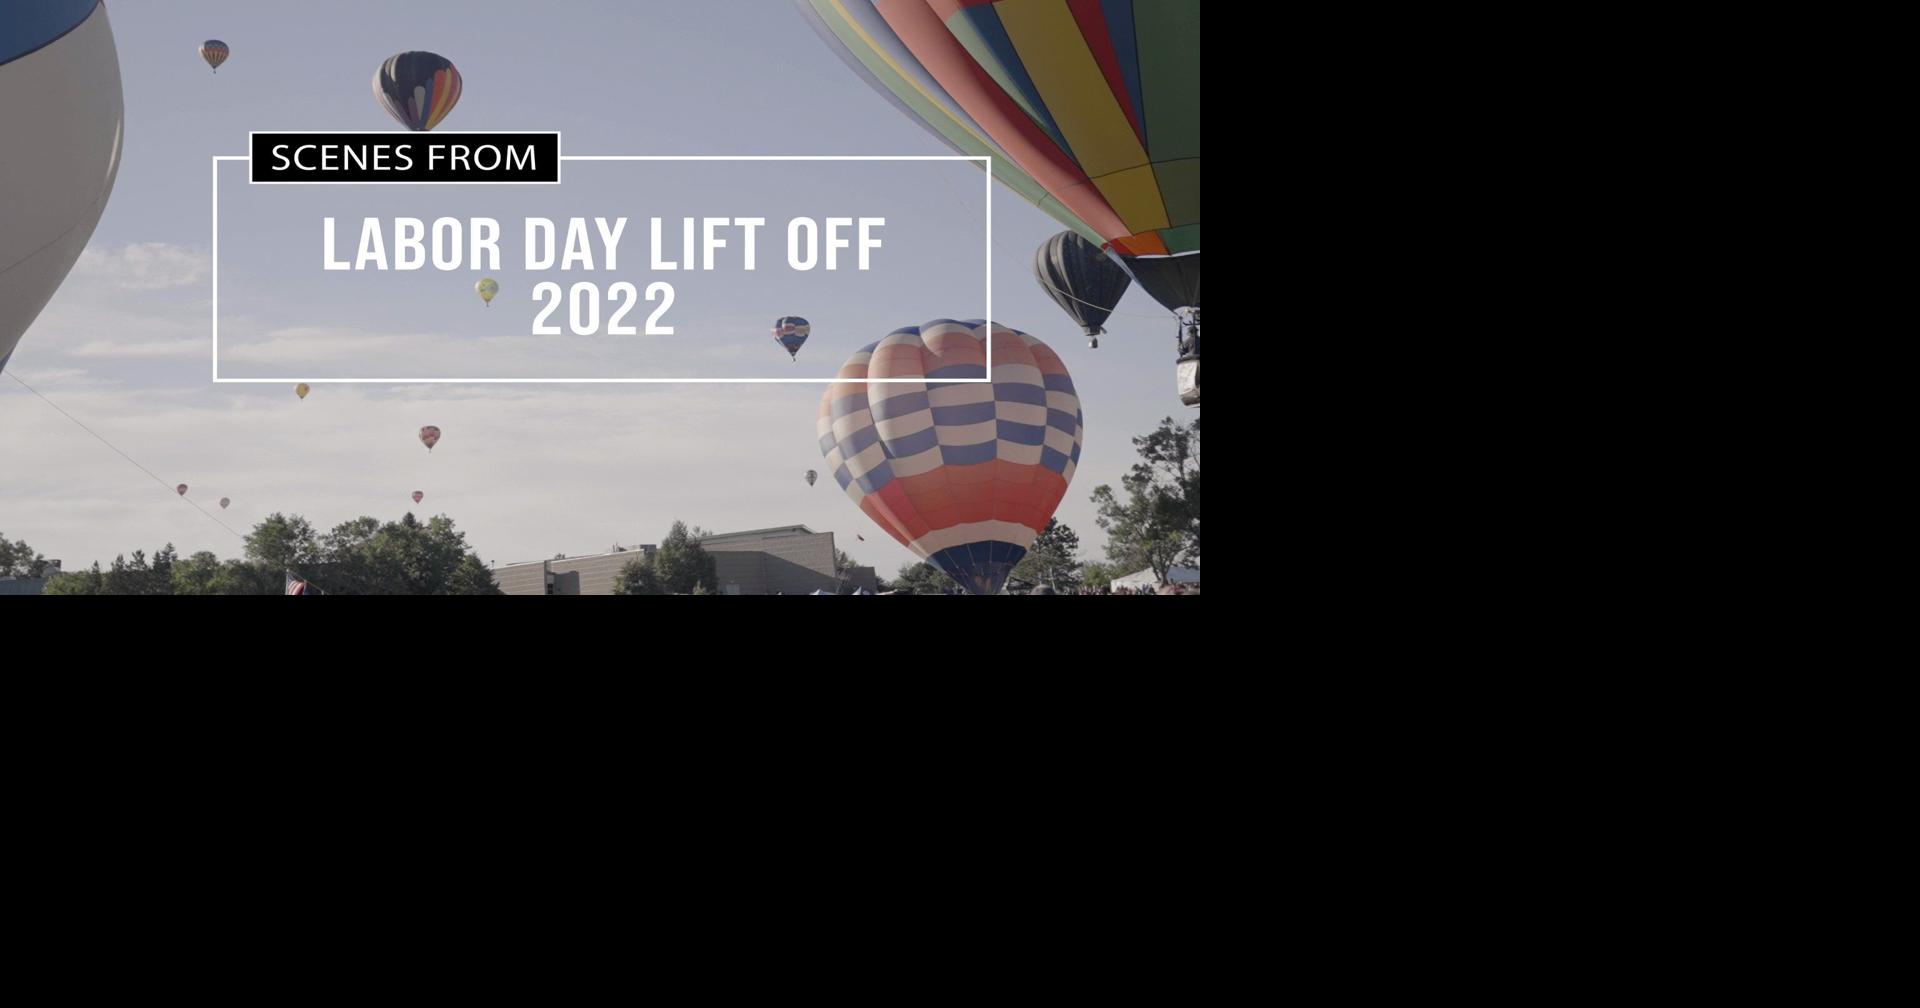 SCENES FROM Labor Day Lift Off 2022 Lifestyle